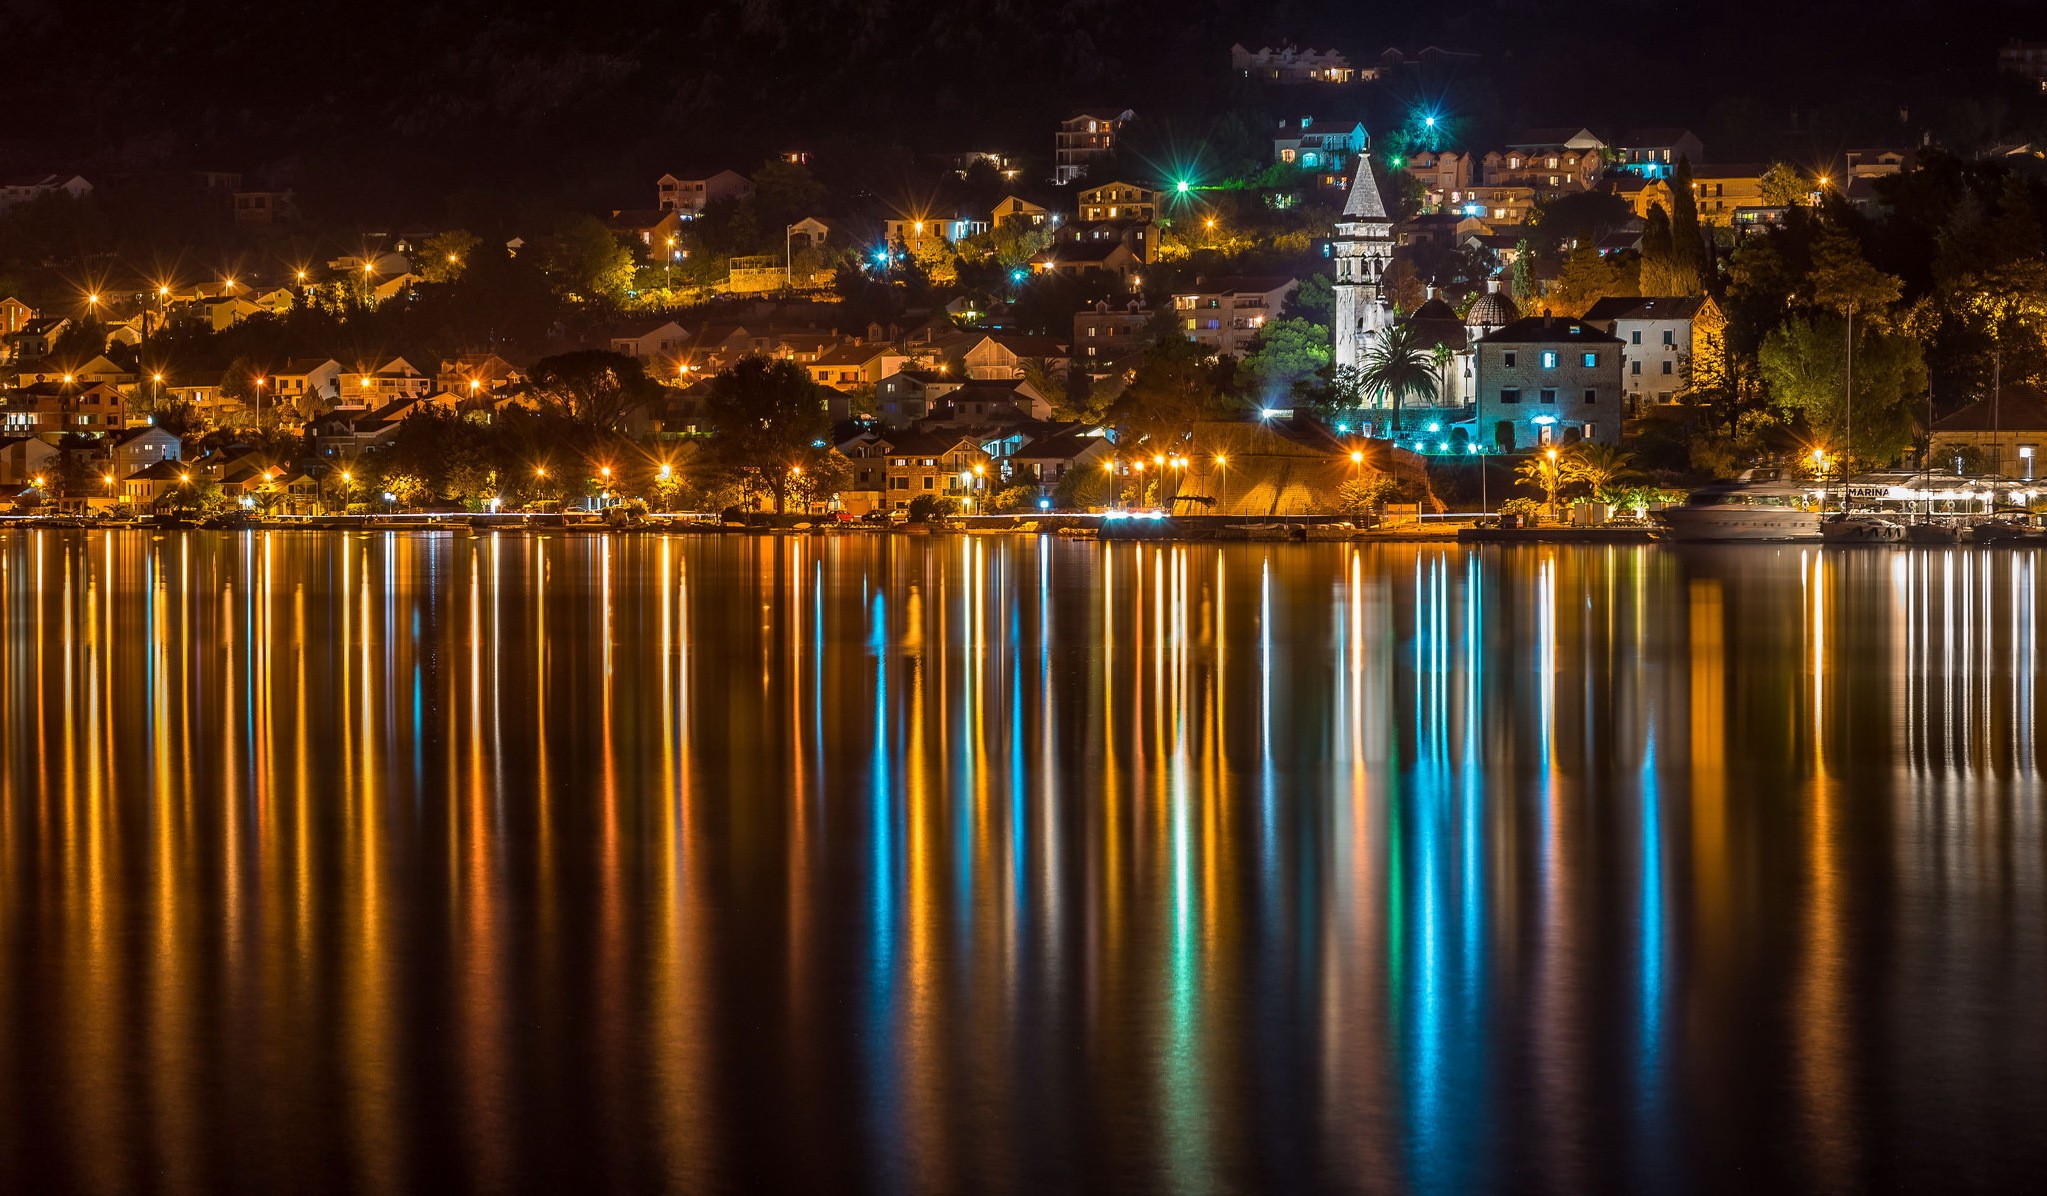 Cityscape Night Lights Building Reflection Water Church Trees Montenegro Town Yachts 2047x1196